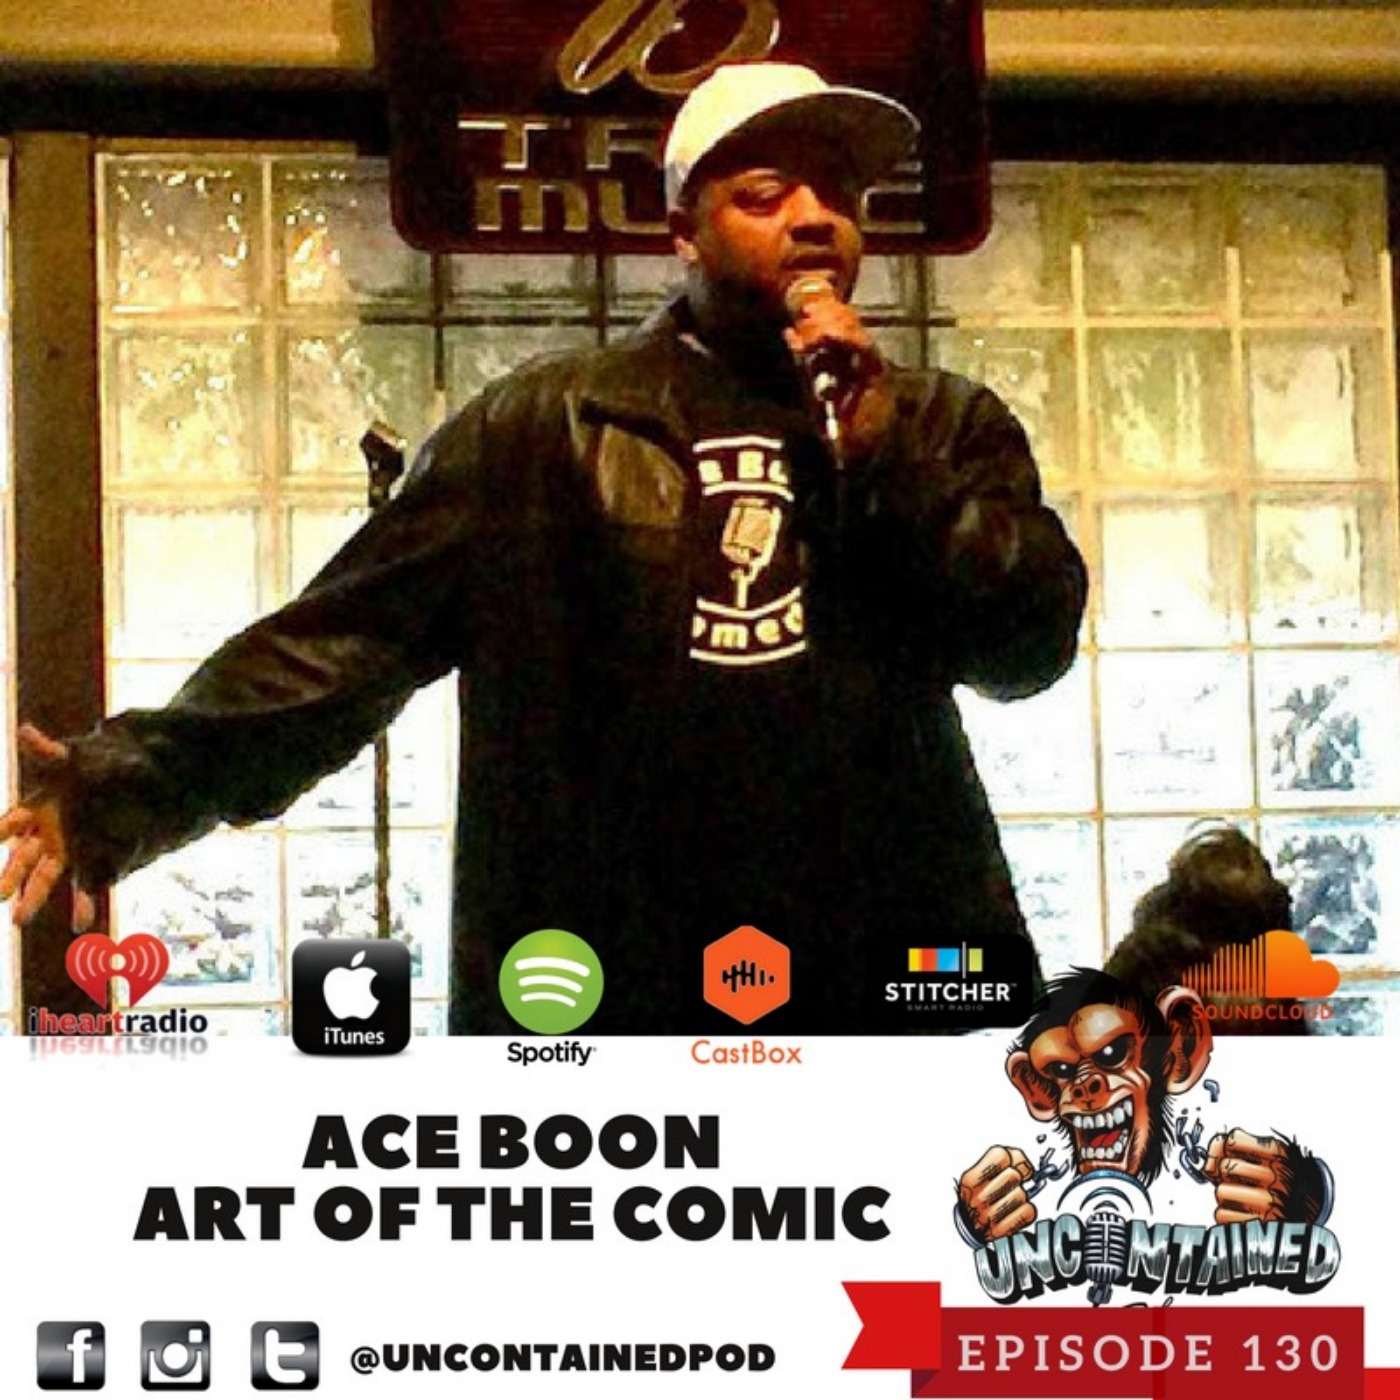 Episode 130: Ace Boon - Art Of The Comic